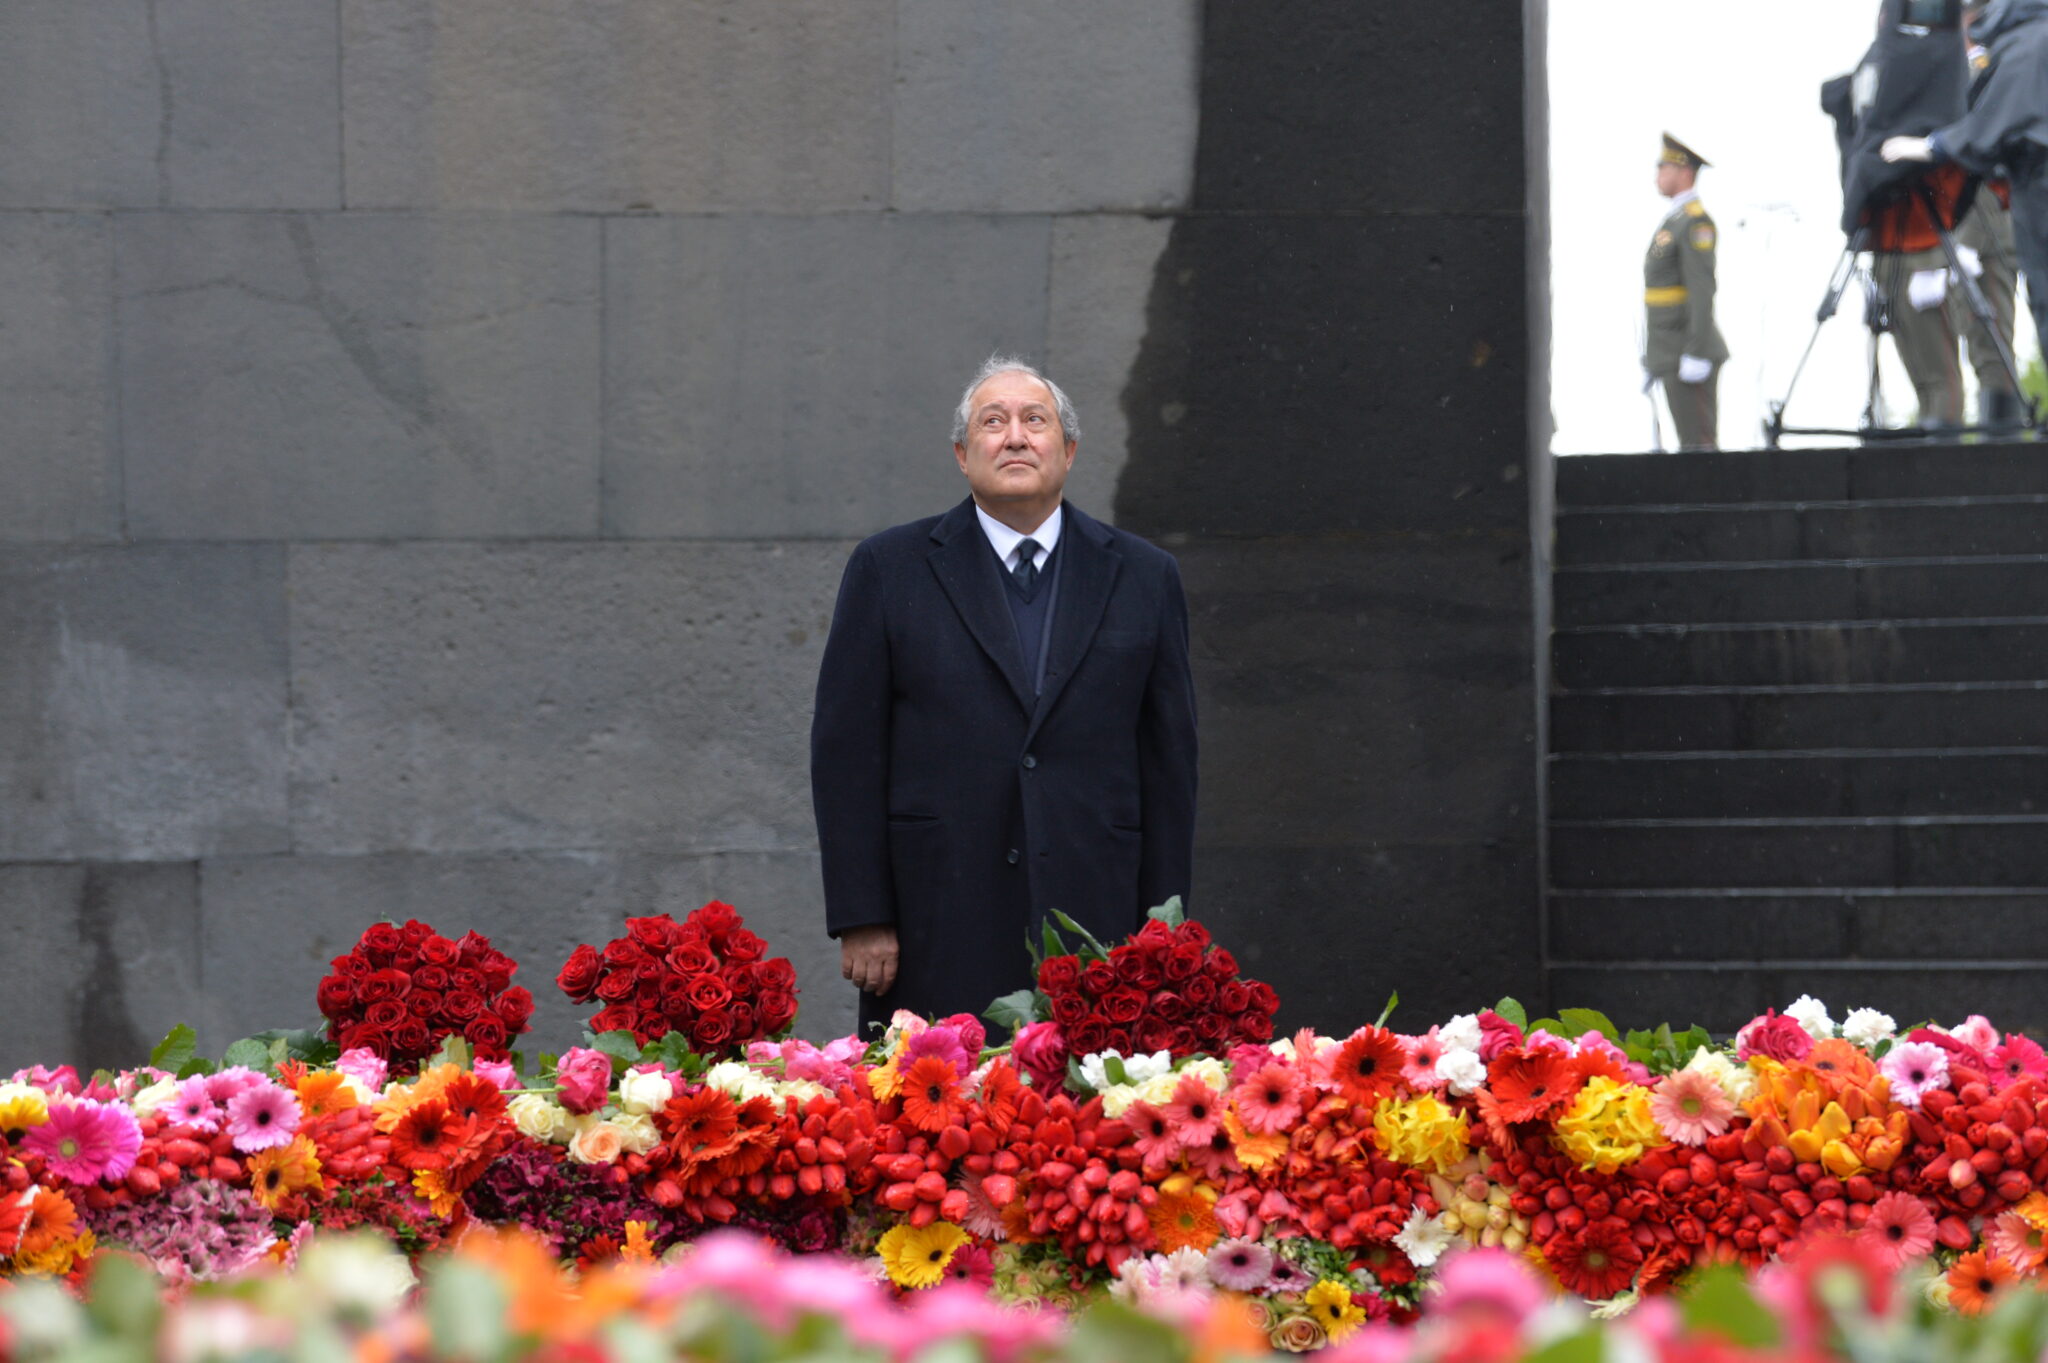 Indifference and impunity give birth to new crimes: President Sarkissian’s message on Armenian Genocide anniversary